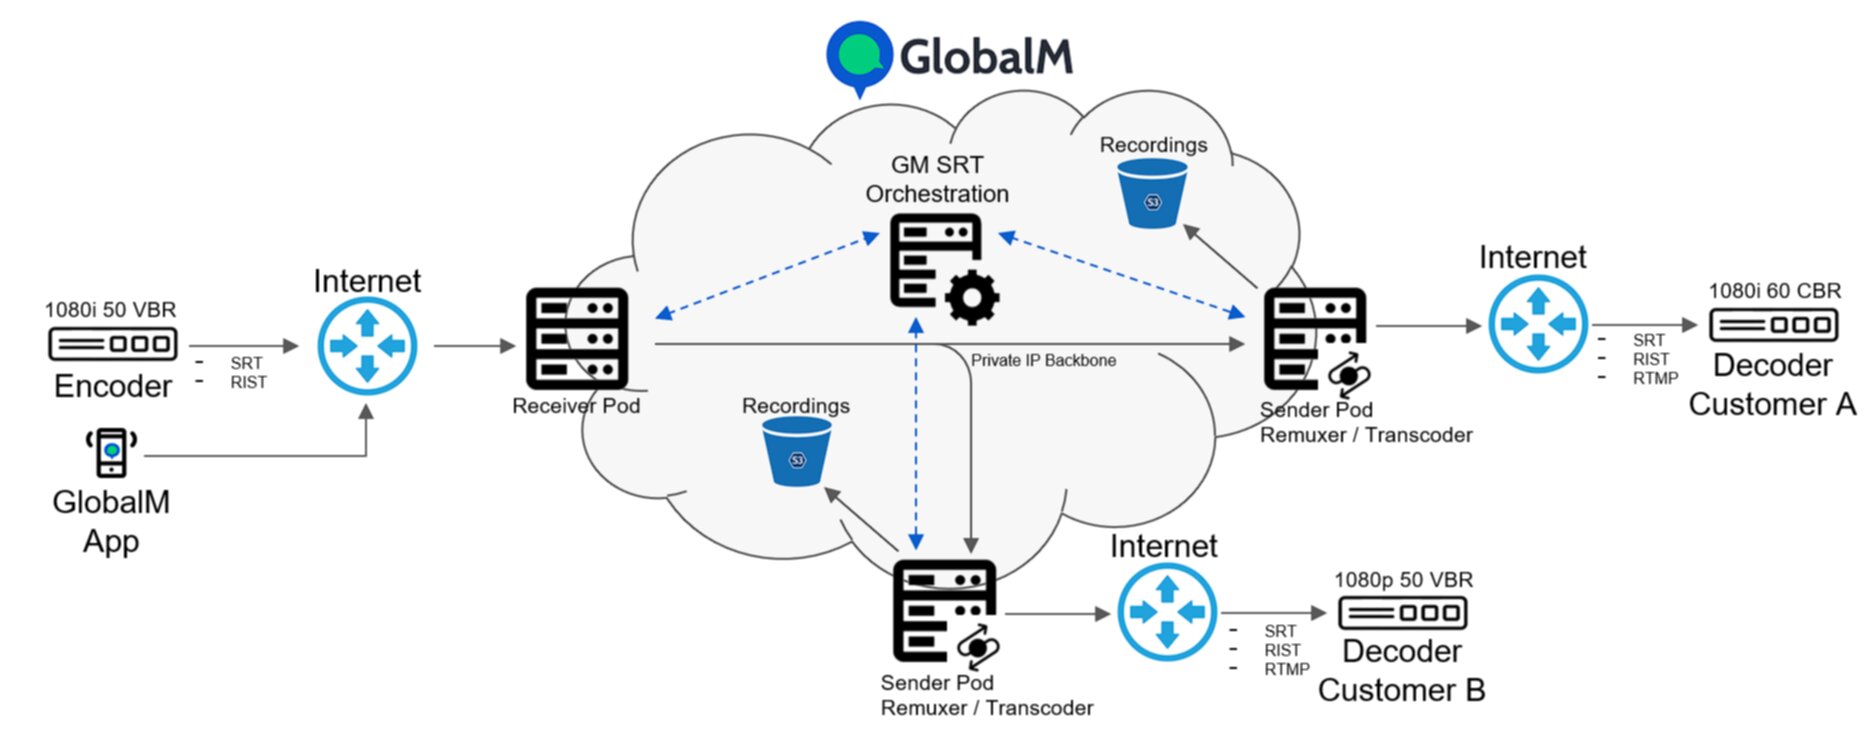 How does the GlobalM network work